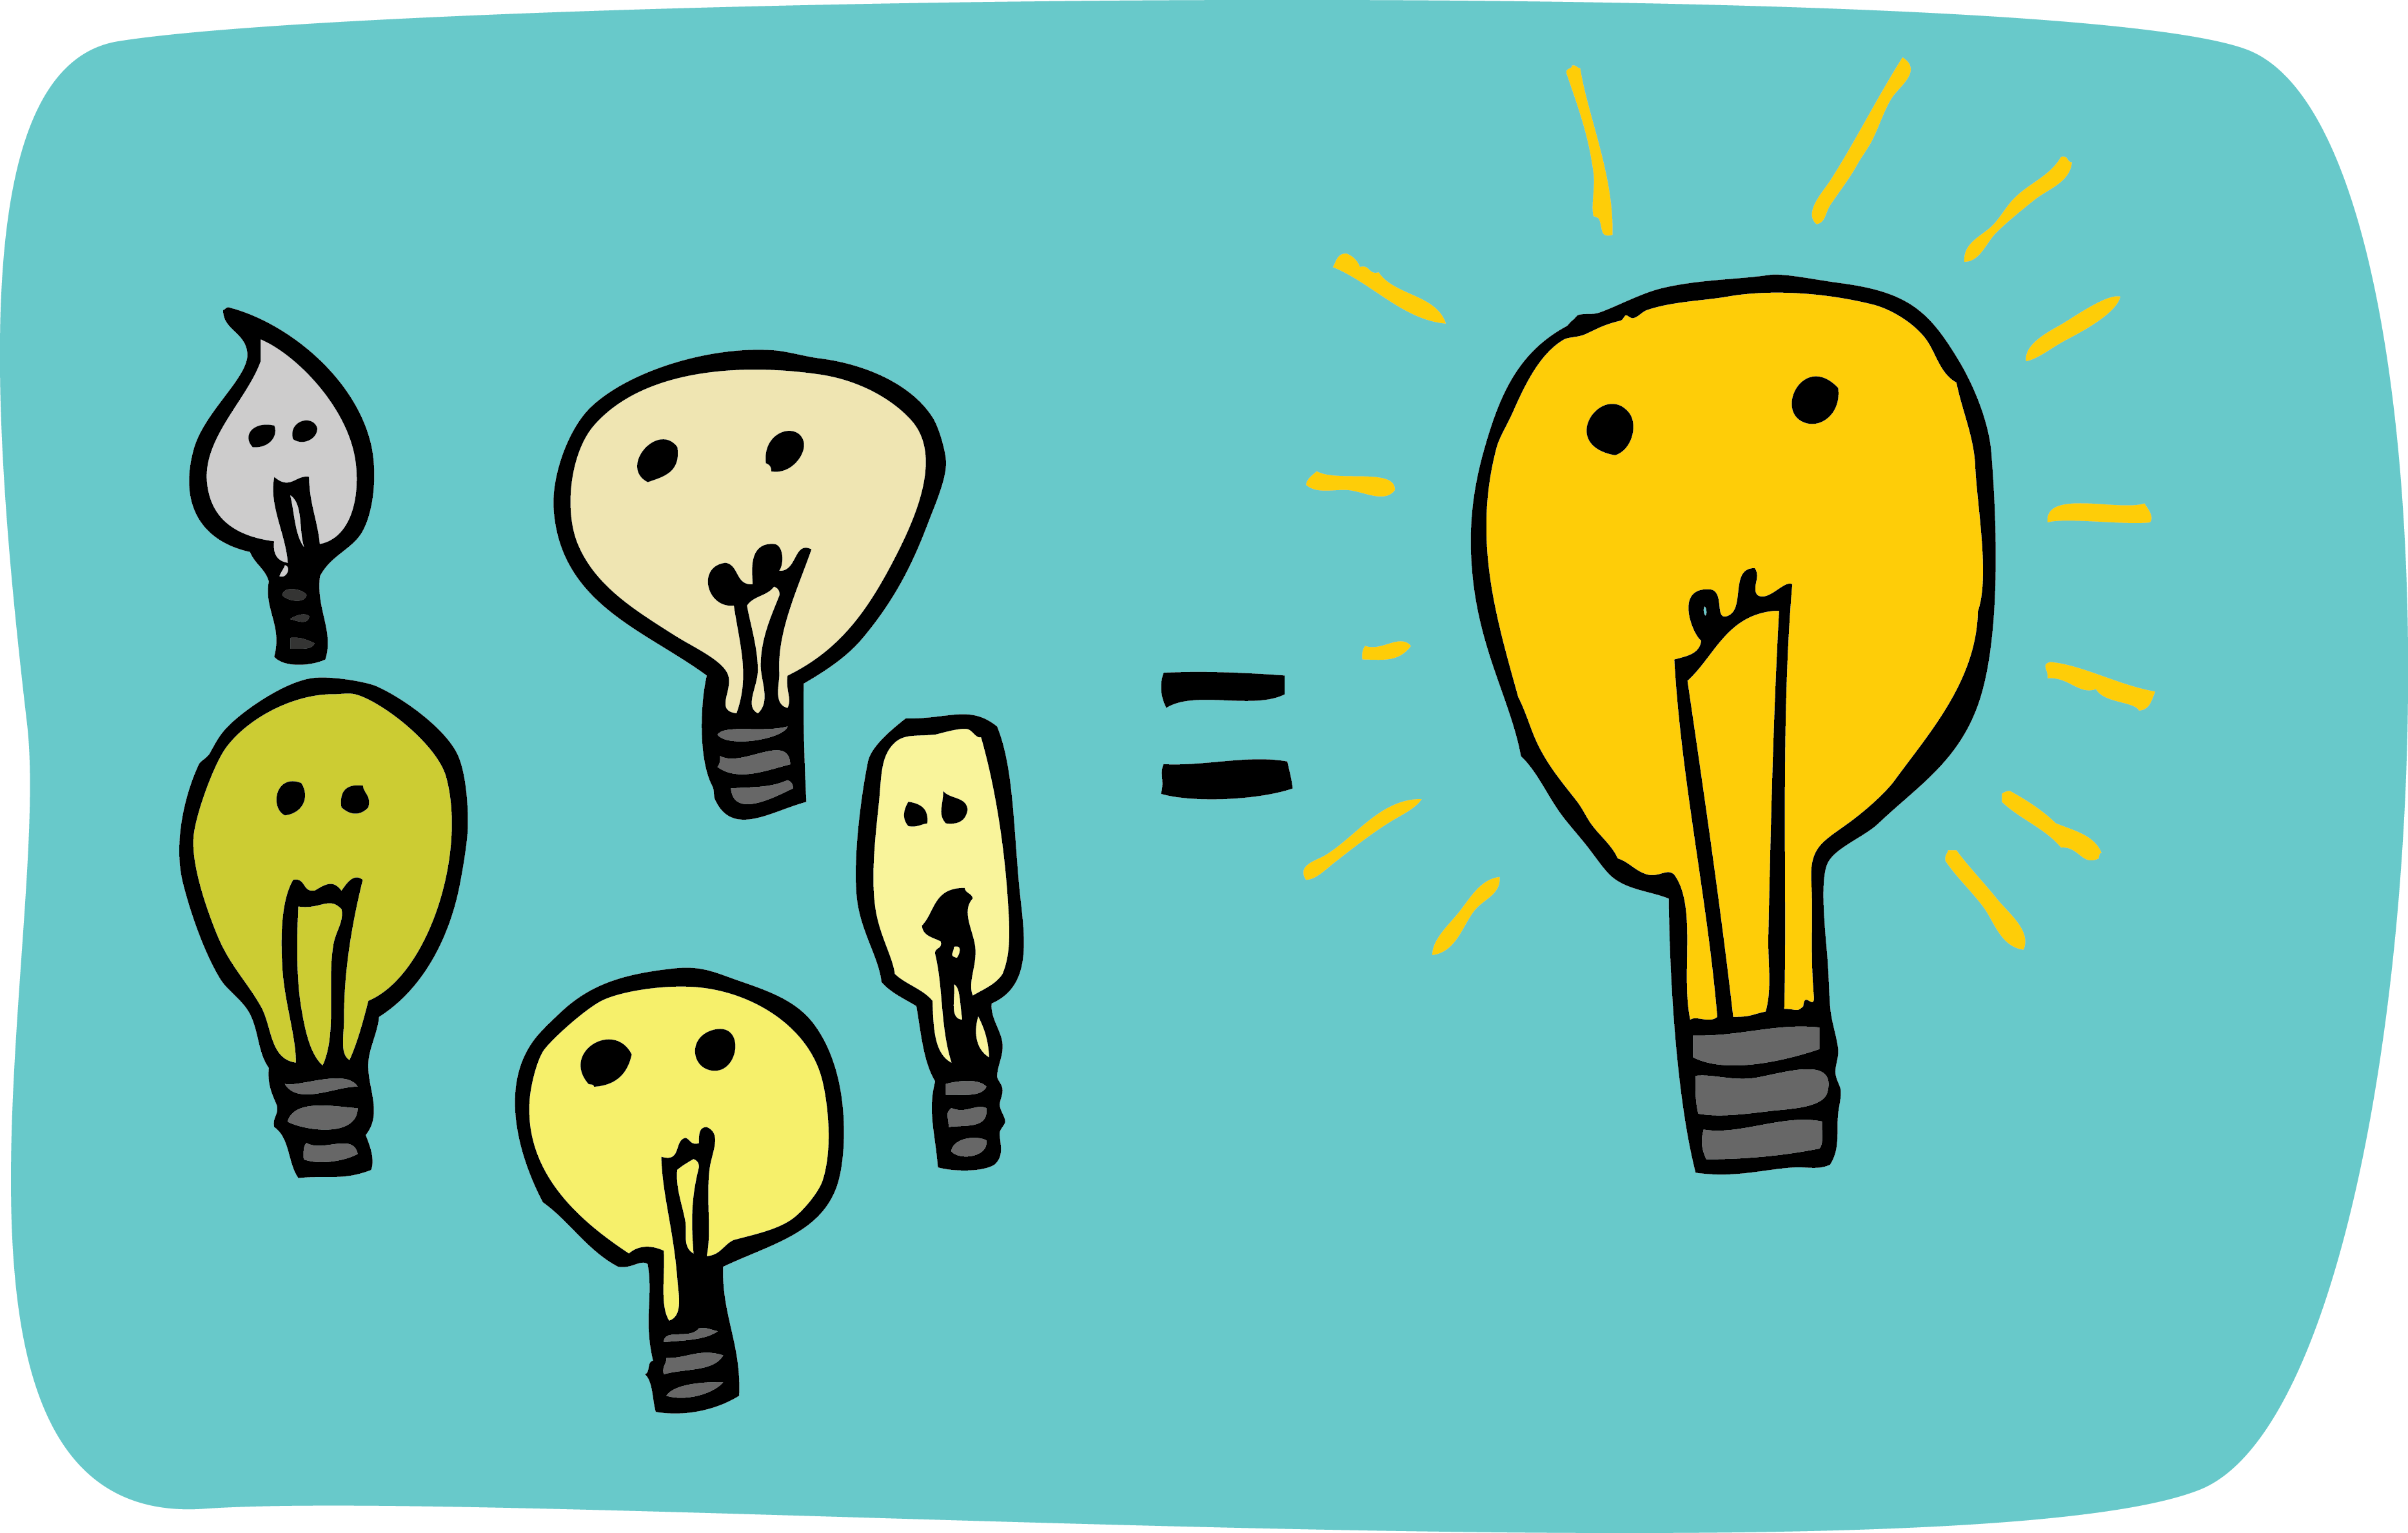 brainstorming small lightbulbs combined become a big idea